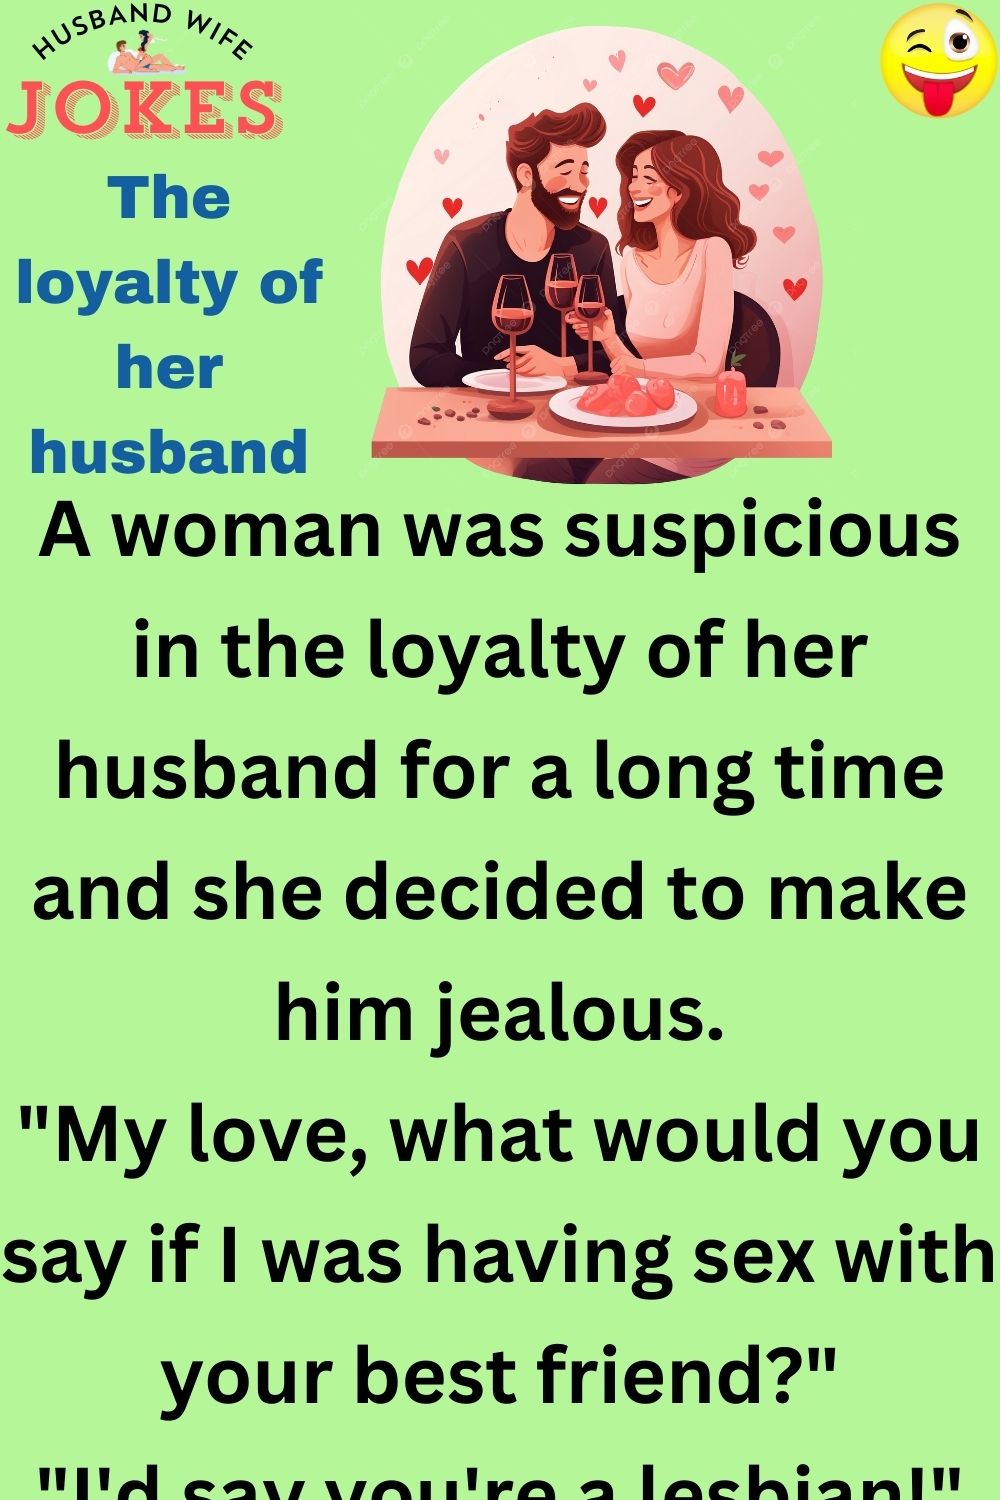 The loyalty of her husband